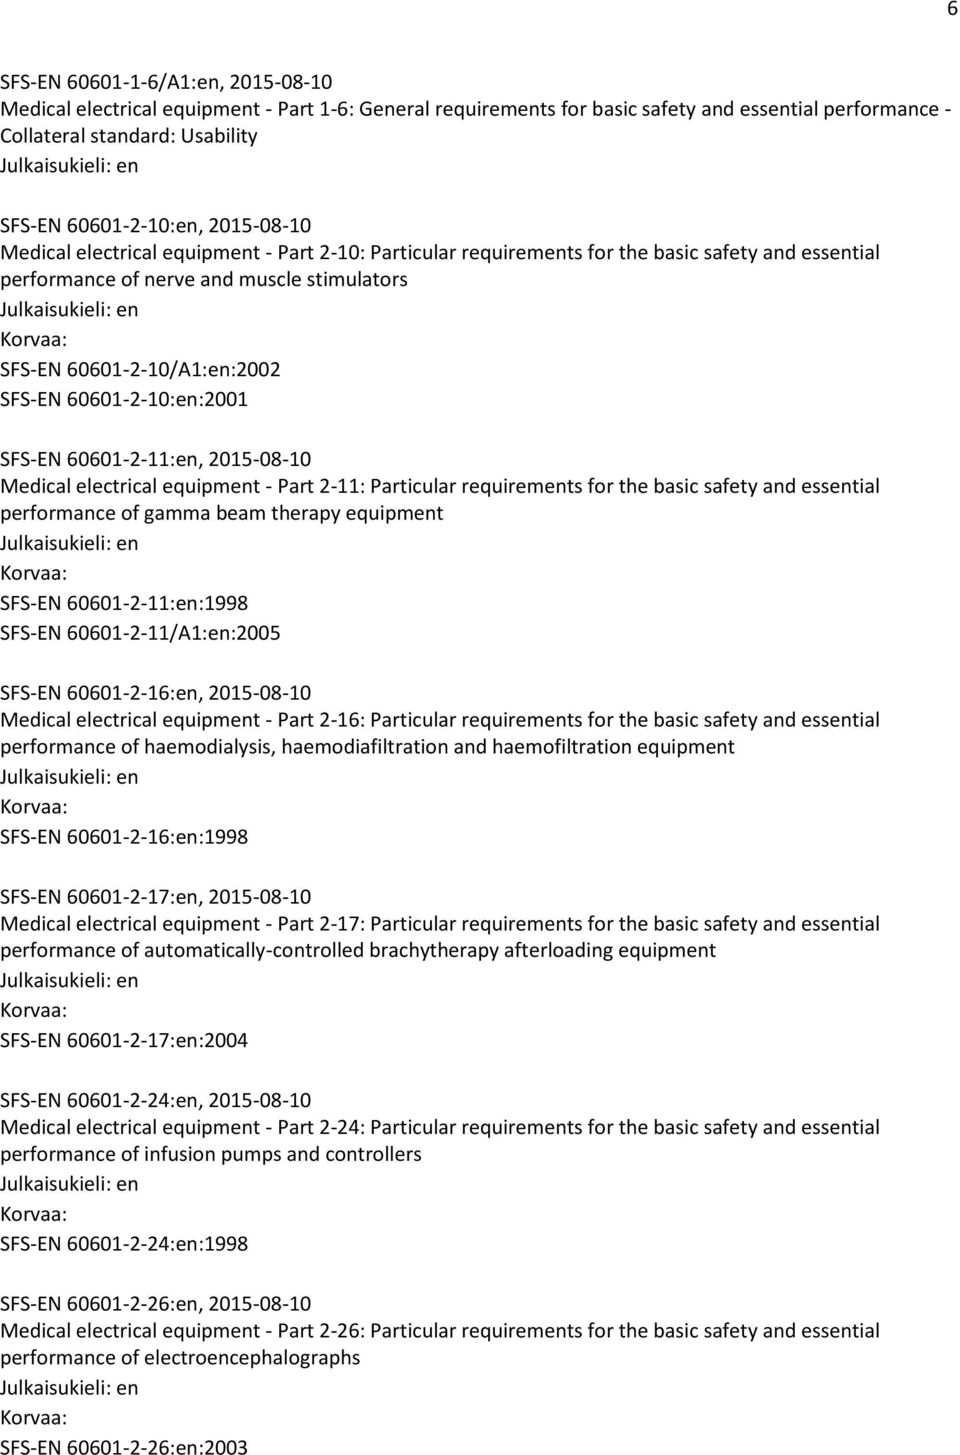 60601-2-10:en:2001 SFS-EN 60601-2-11:en, 2015-08-10 Medical electrical equipment - Part 2-11: Particular requirements for the basic safety and essential performance of gamma beam therapy equipment